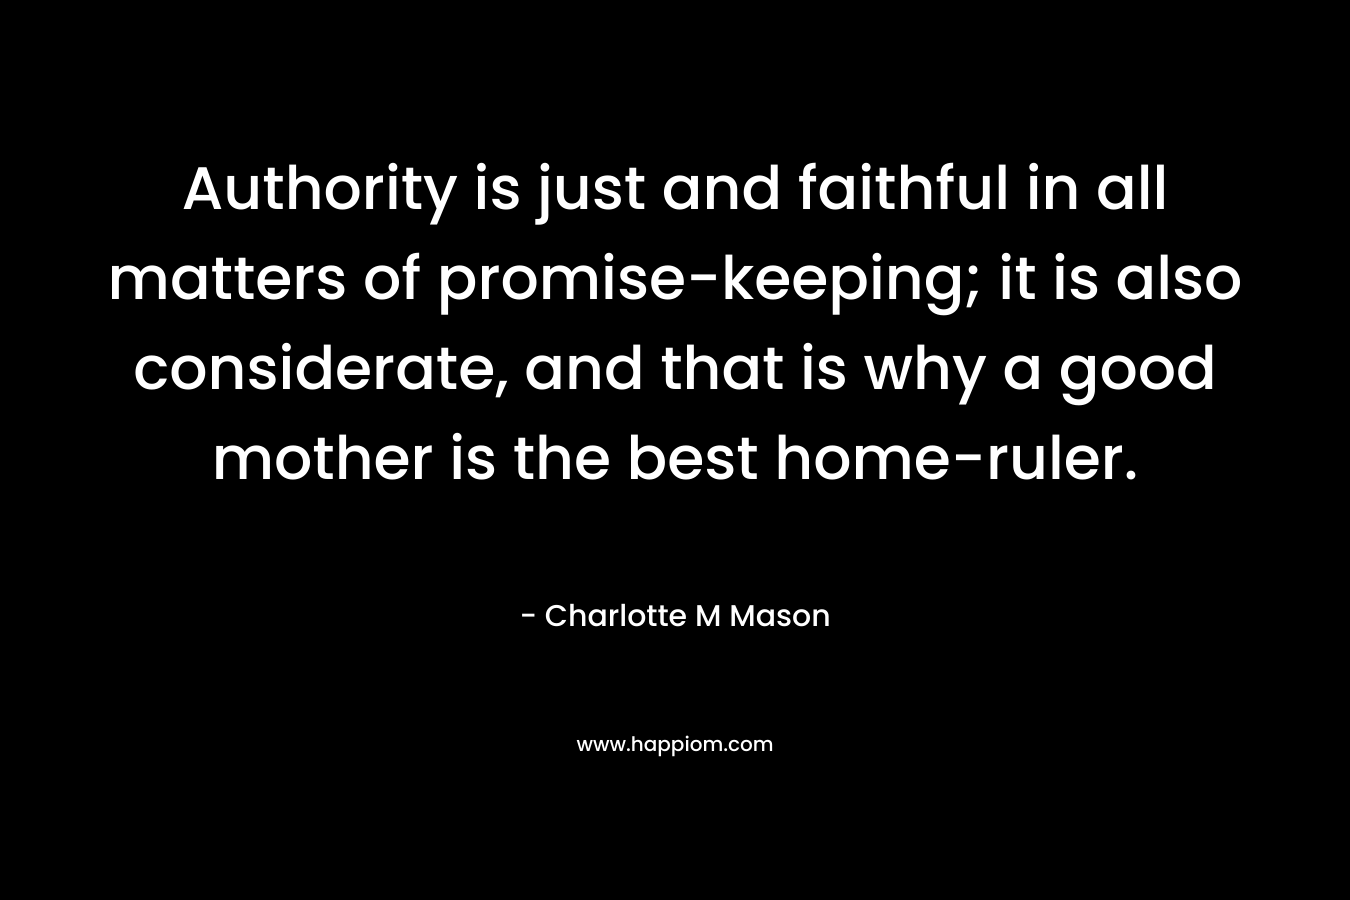 Authority is just and faithful in all matters of promise-keeping; it is also considerate, and that is why a good mother is the best home-ruler.